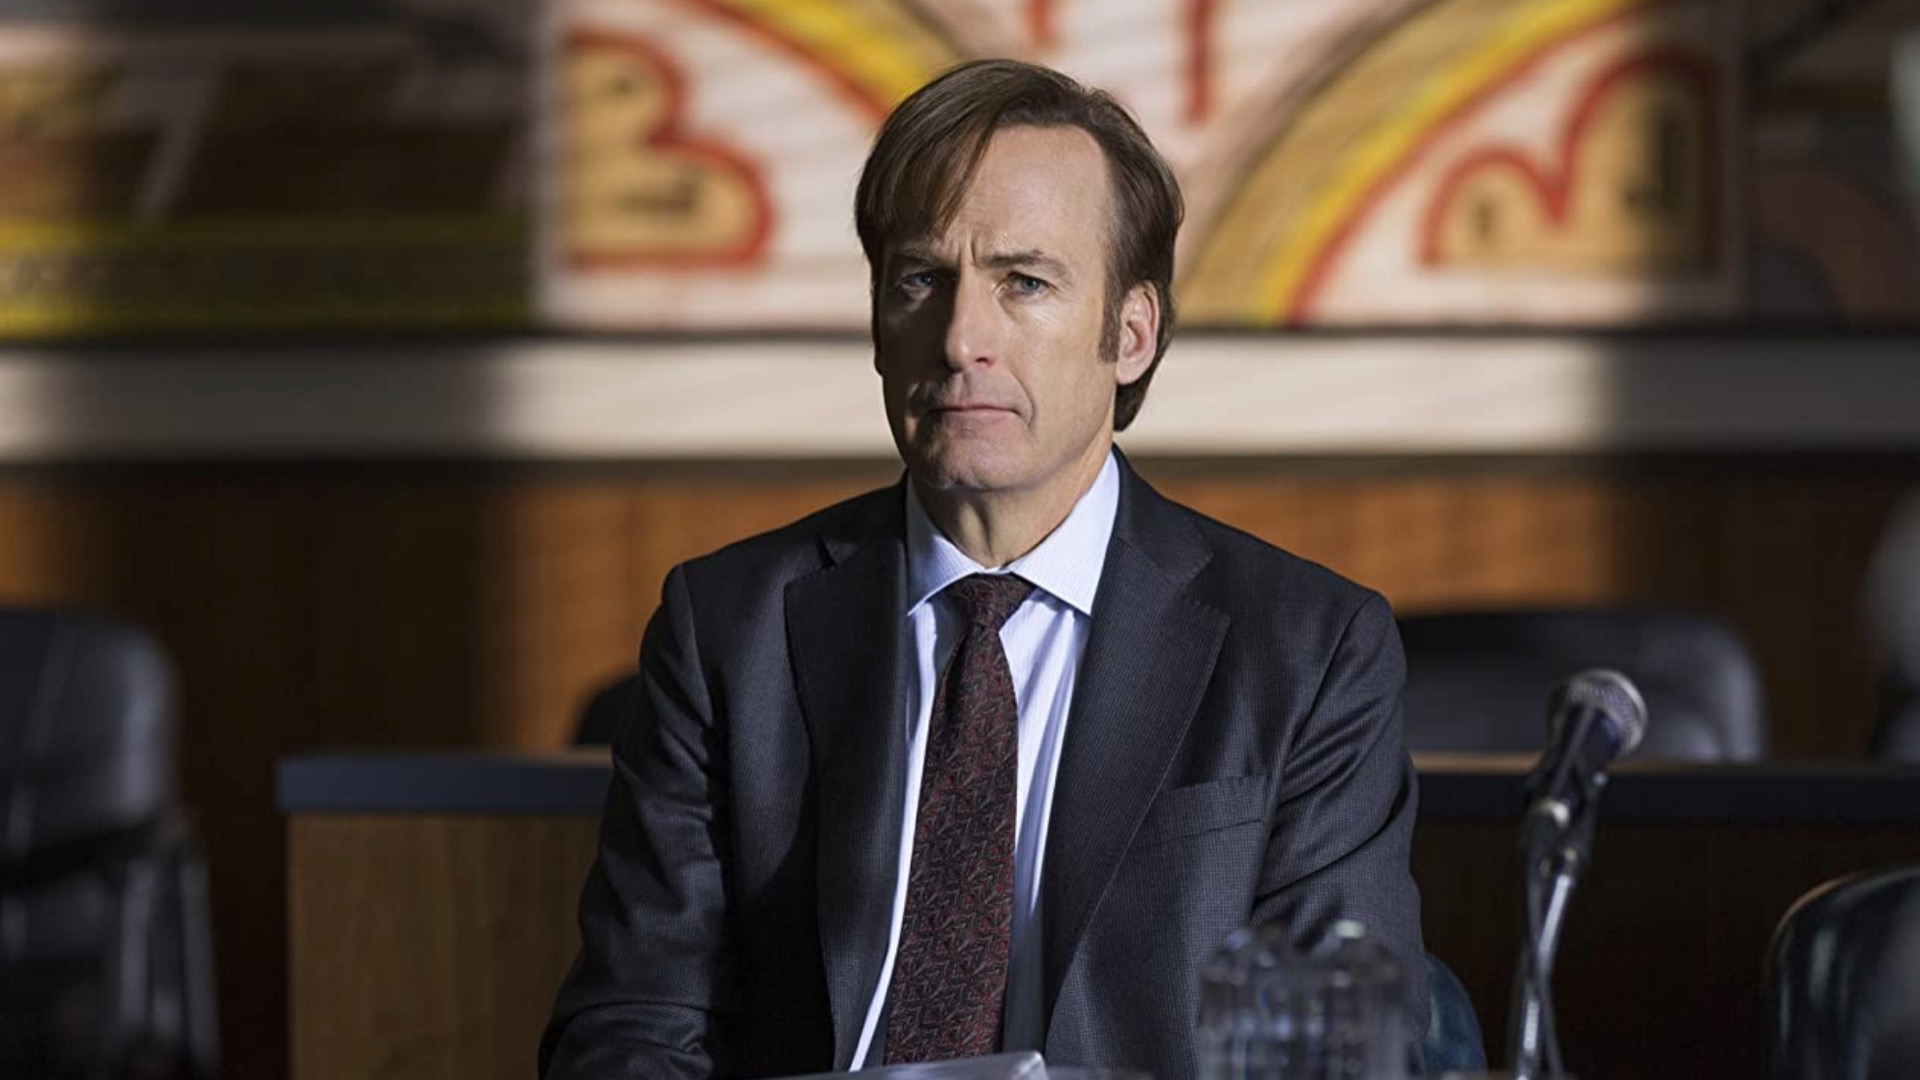 Bob Odenkirk accidentally spoiled the Better Call Saul mid-season finale months ago